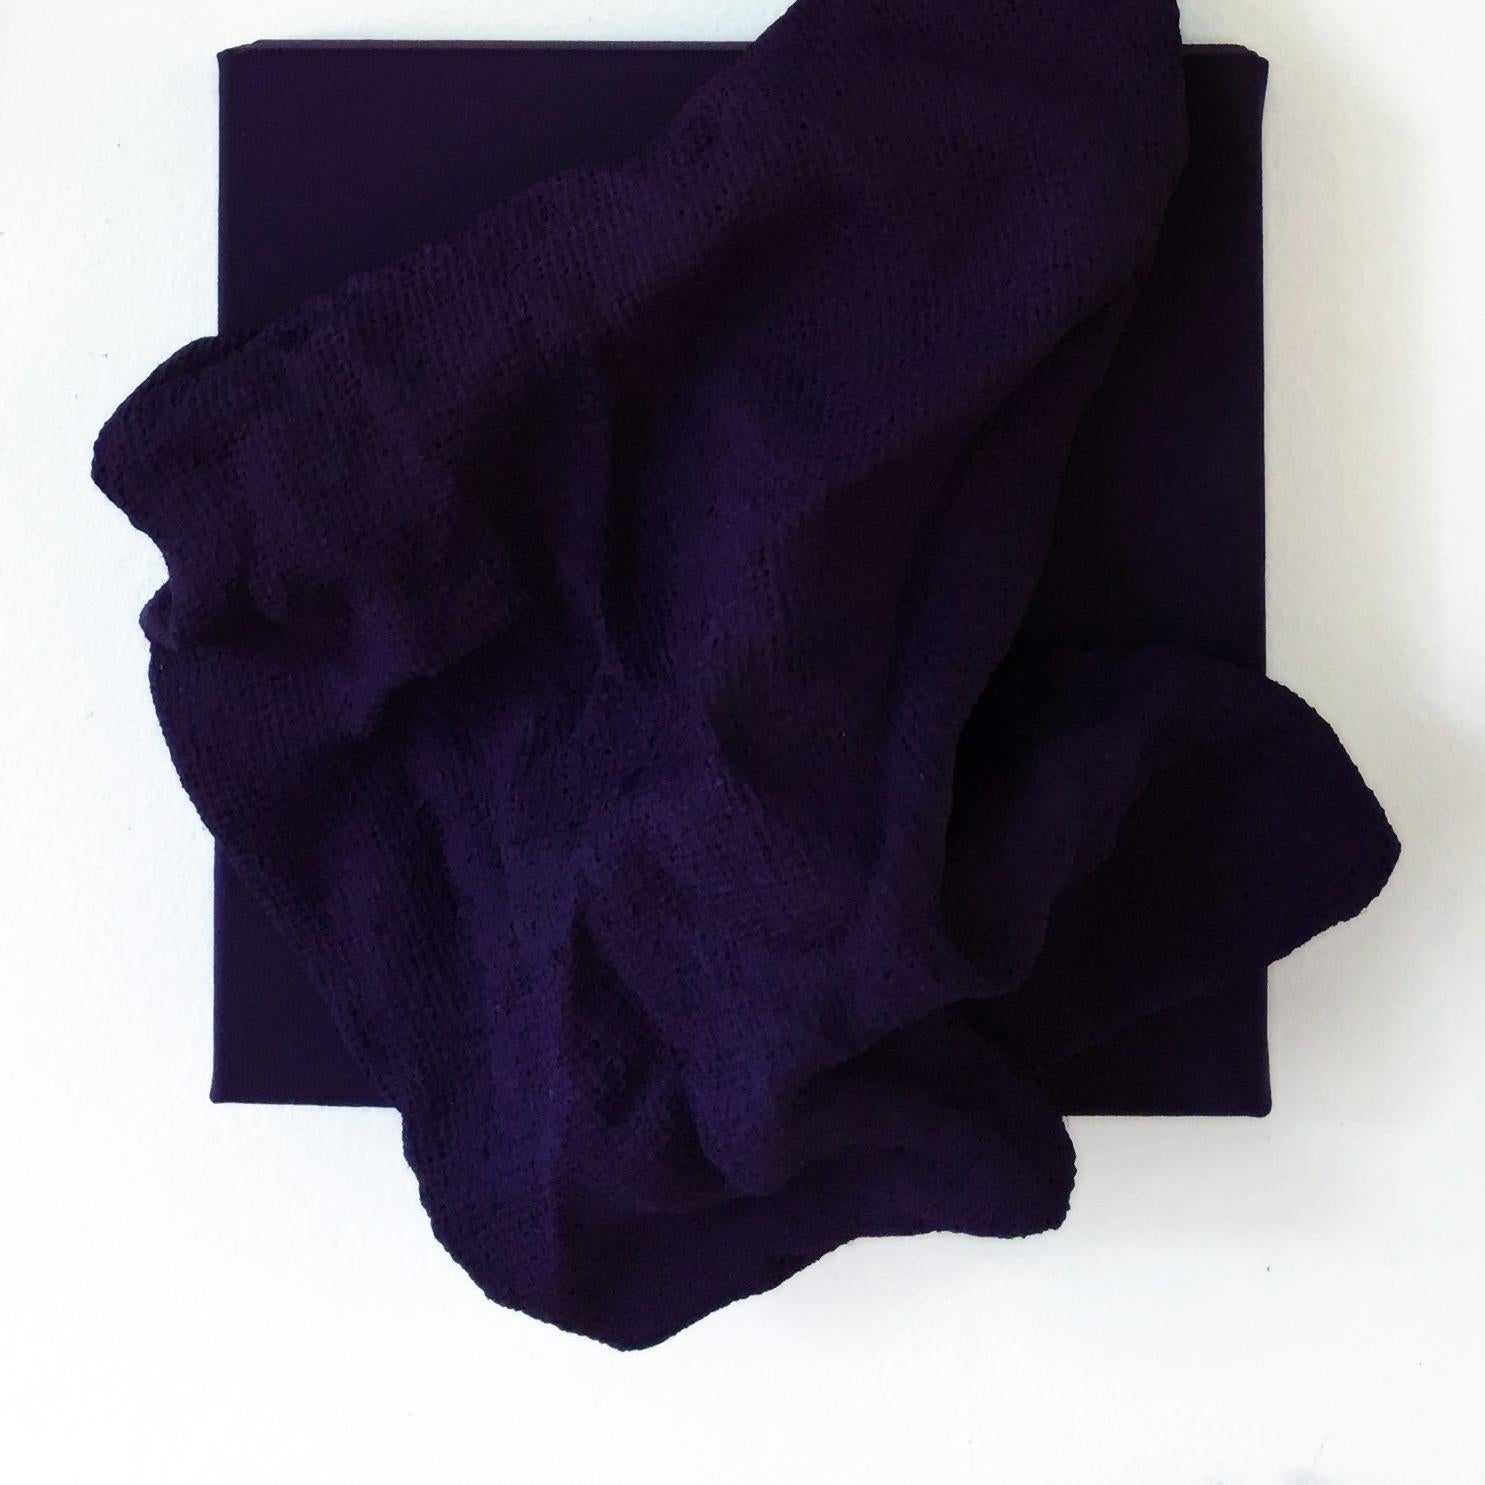 Egyptian Violet Folds - Pair (folds, dark art, fabric, textile arts, wall mount) - Contemporary Sculpture by Chloe Hedden